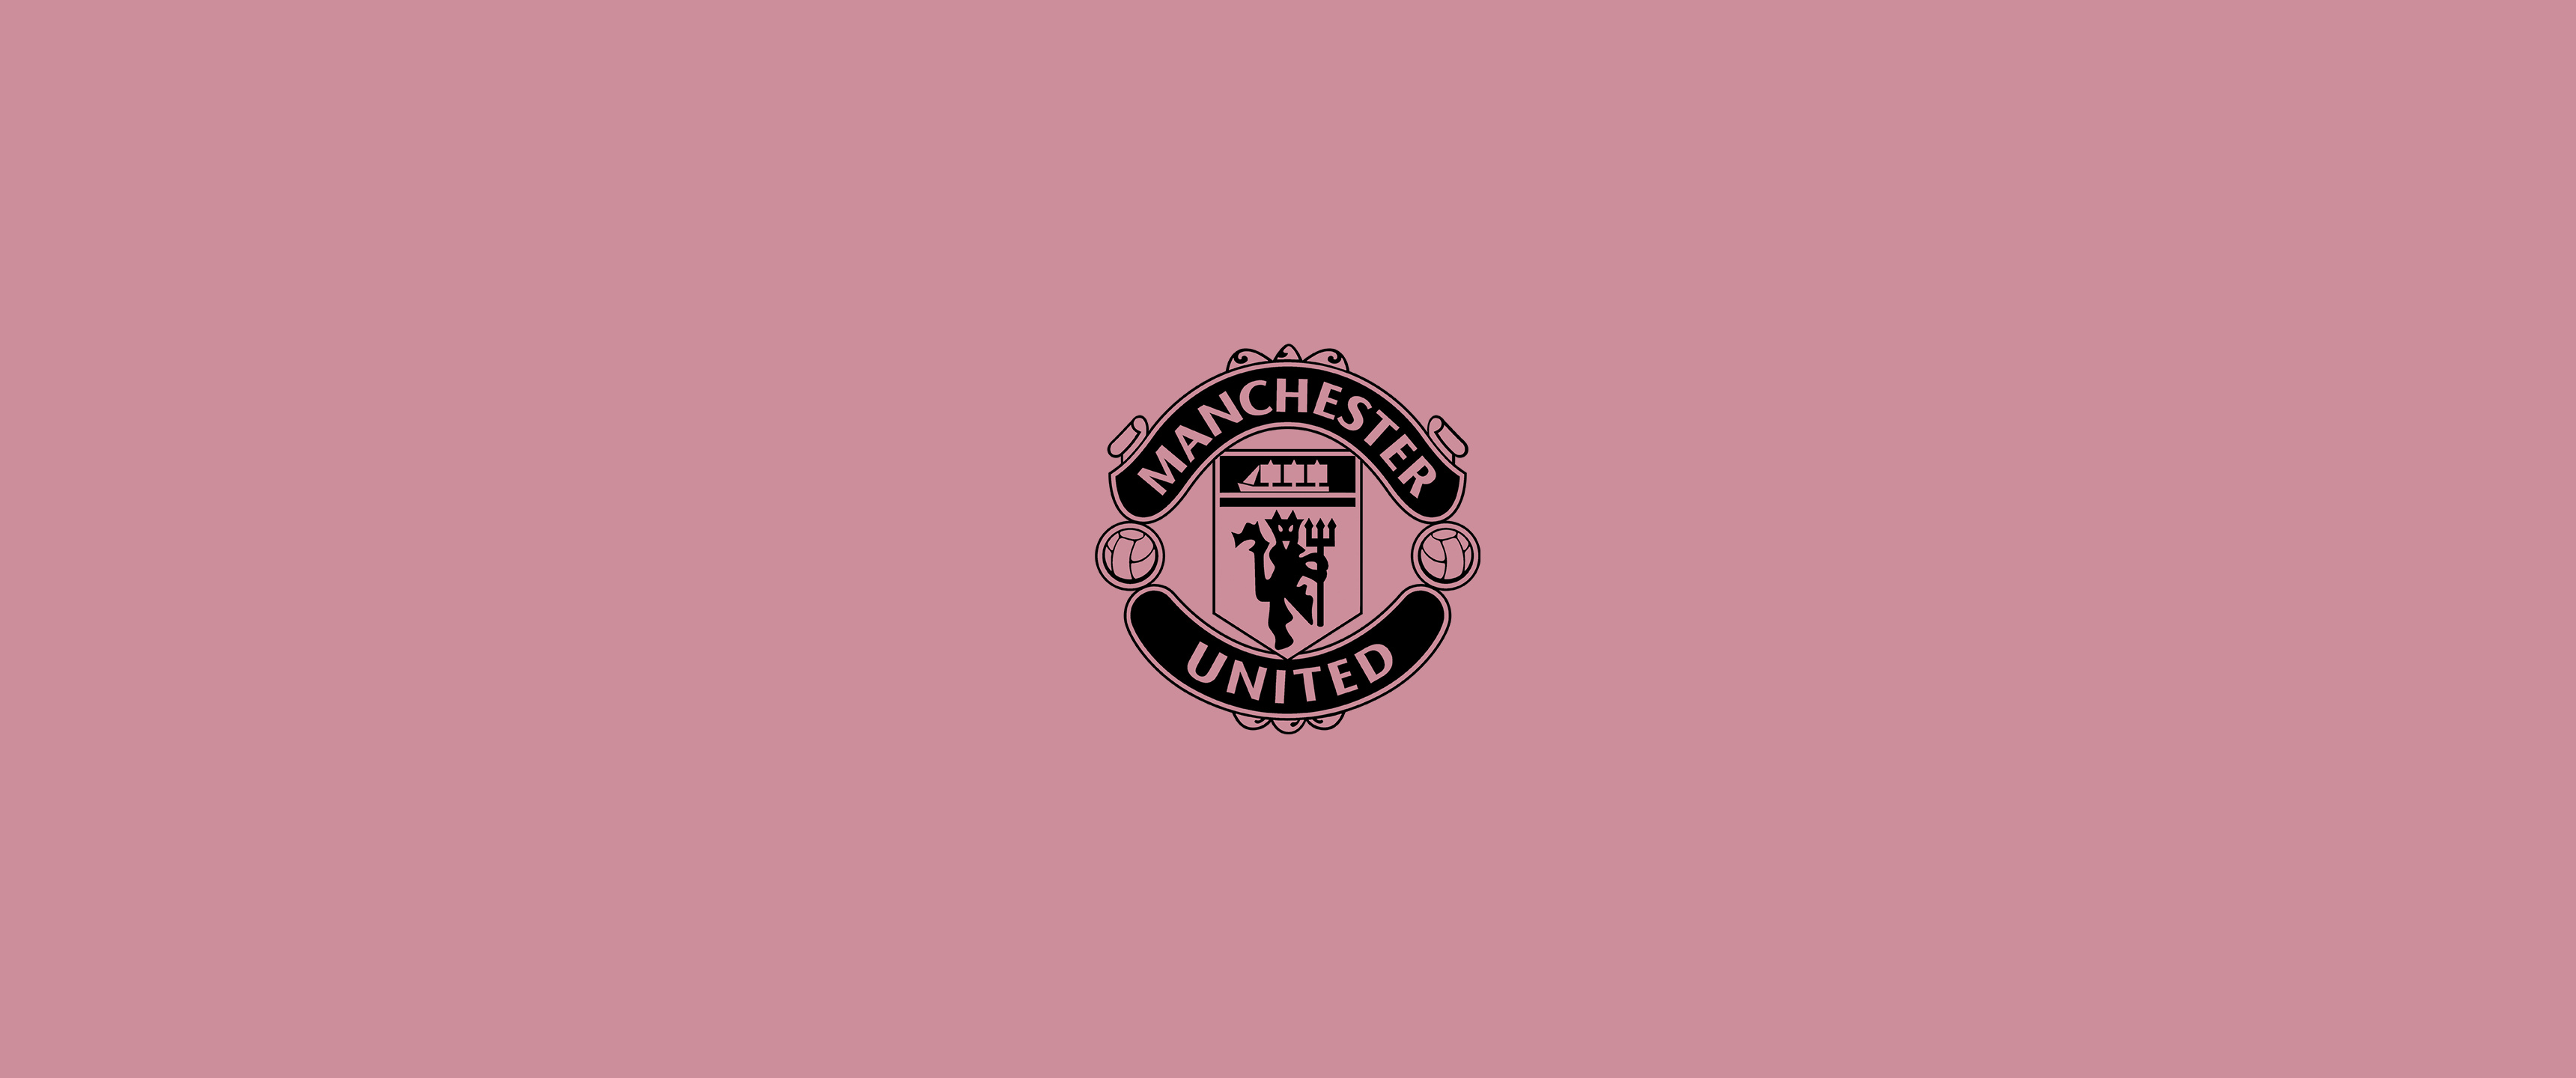 Manchester United, Stunning wallpapers, Red devils pride, Rreddevils collection, 3440x1440 Dual Screen Desktop